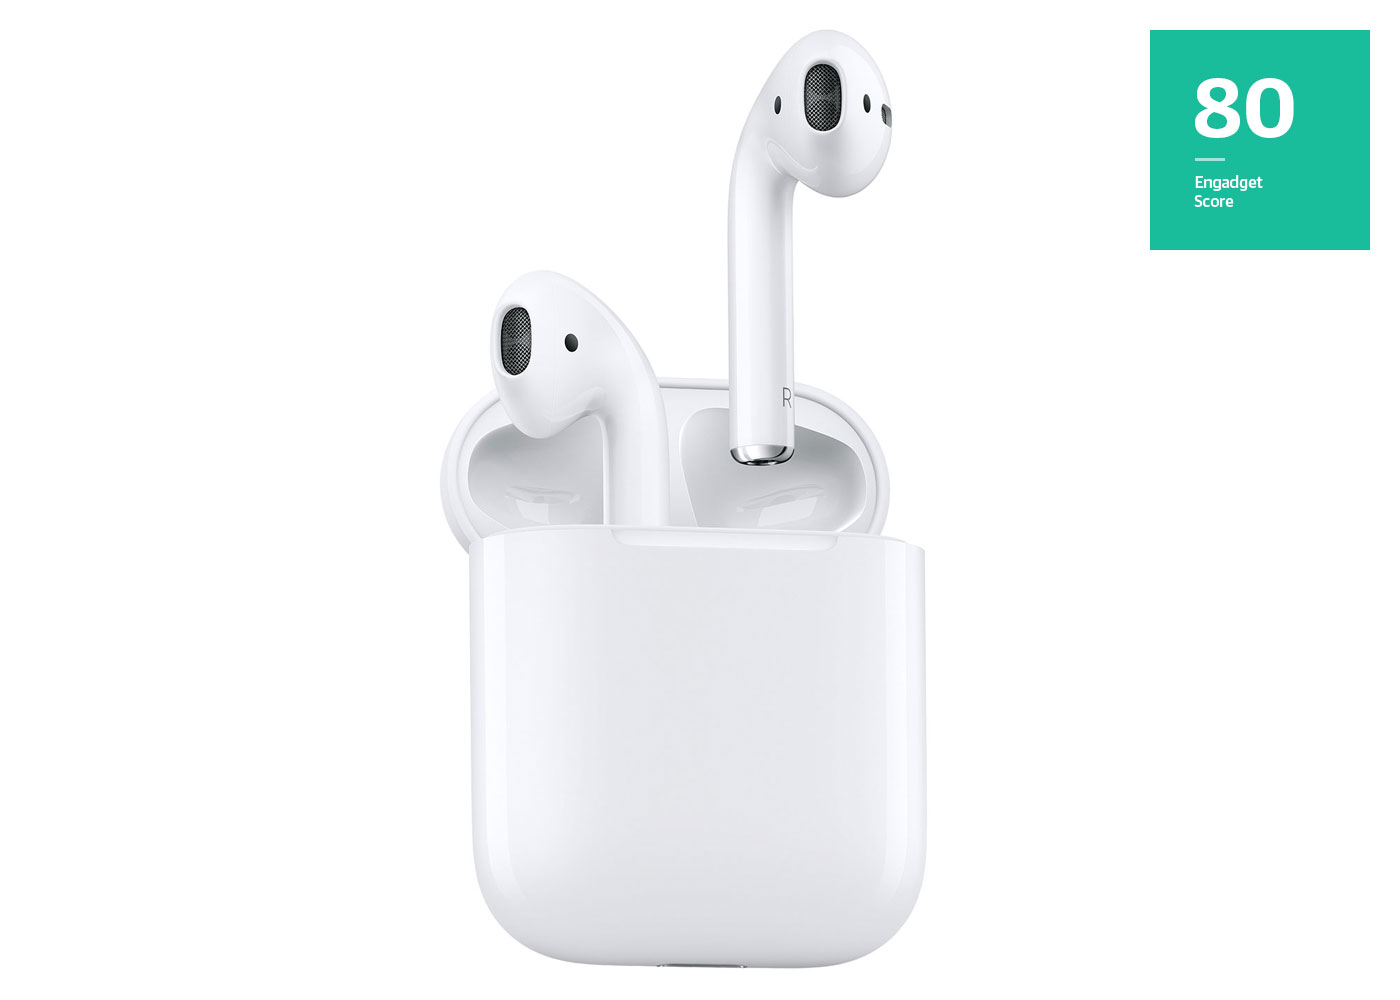 Airpods, score of 80